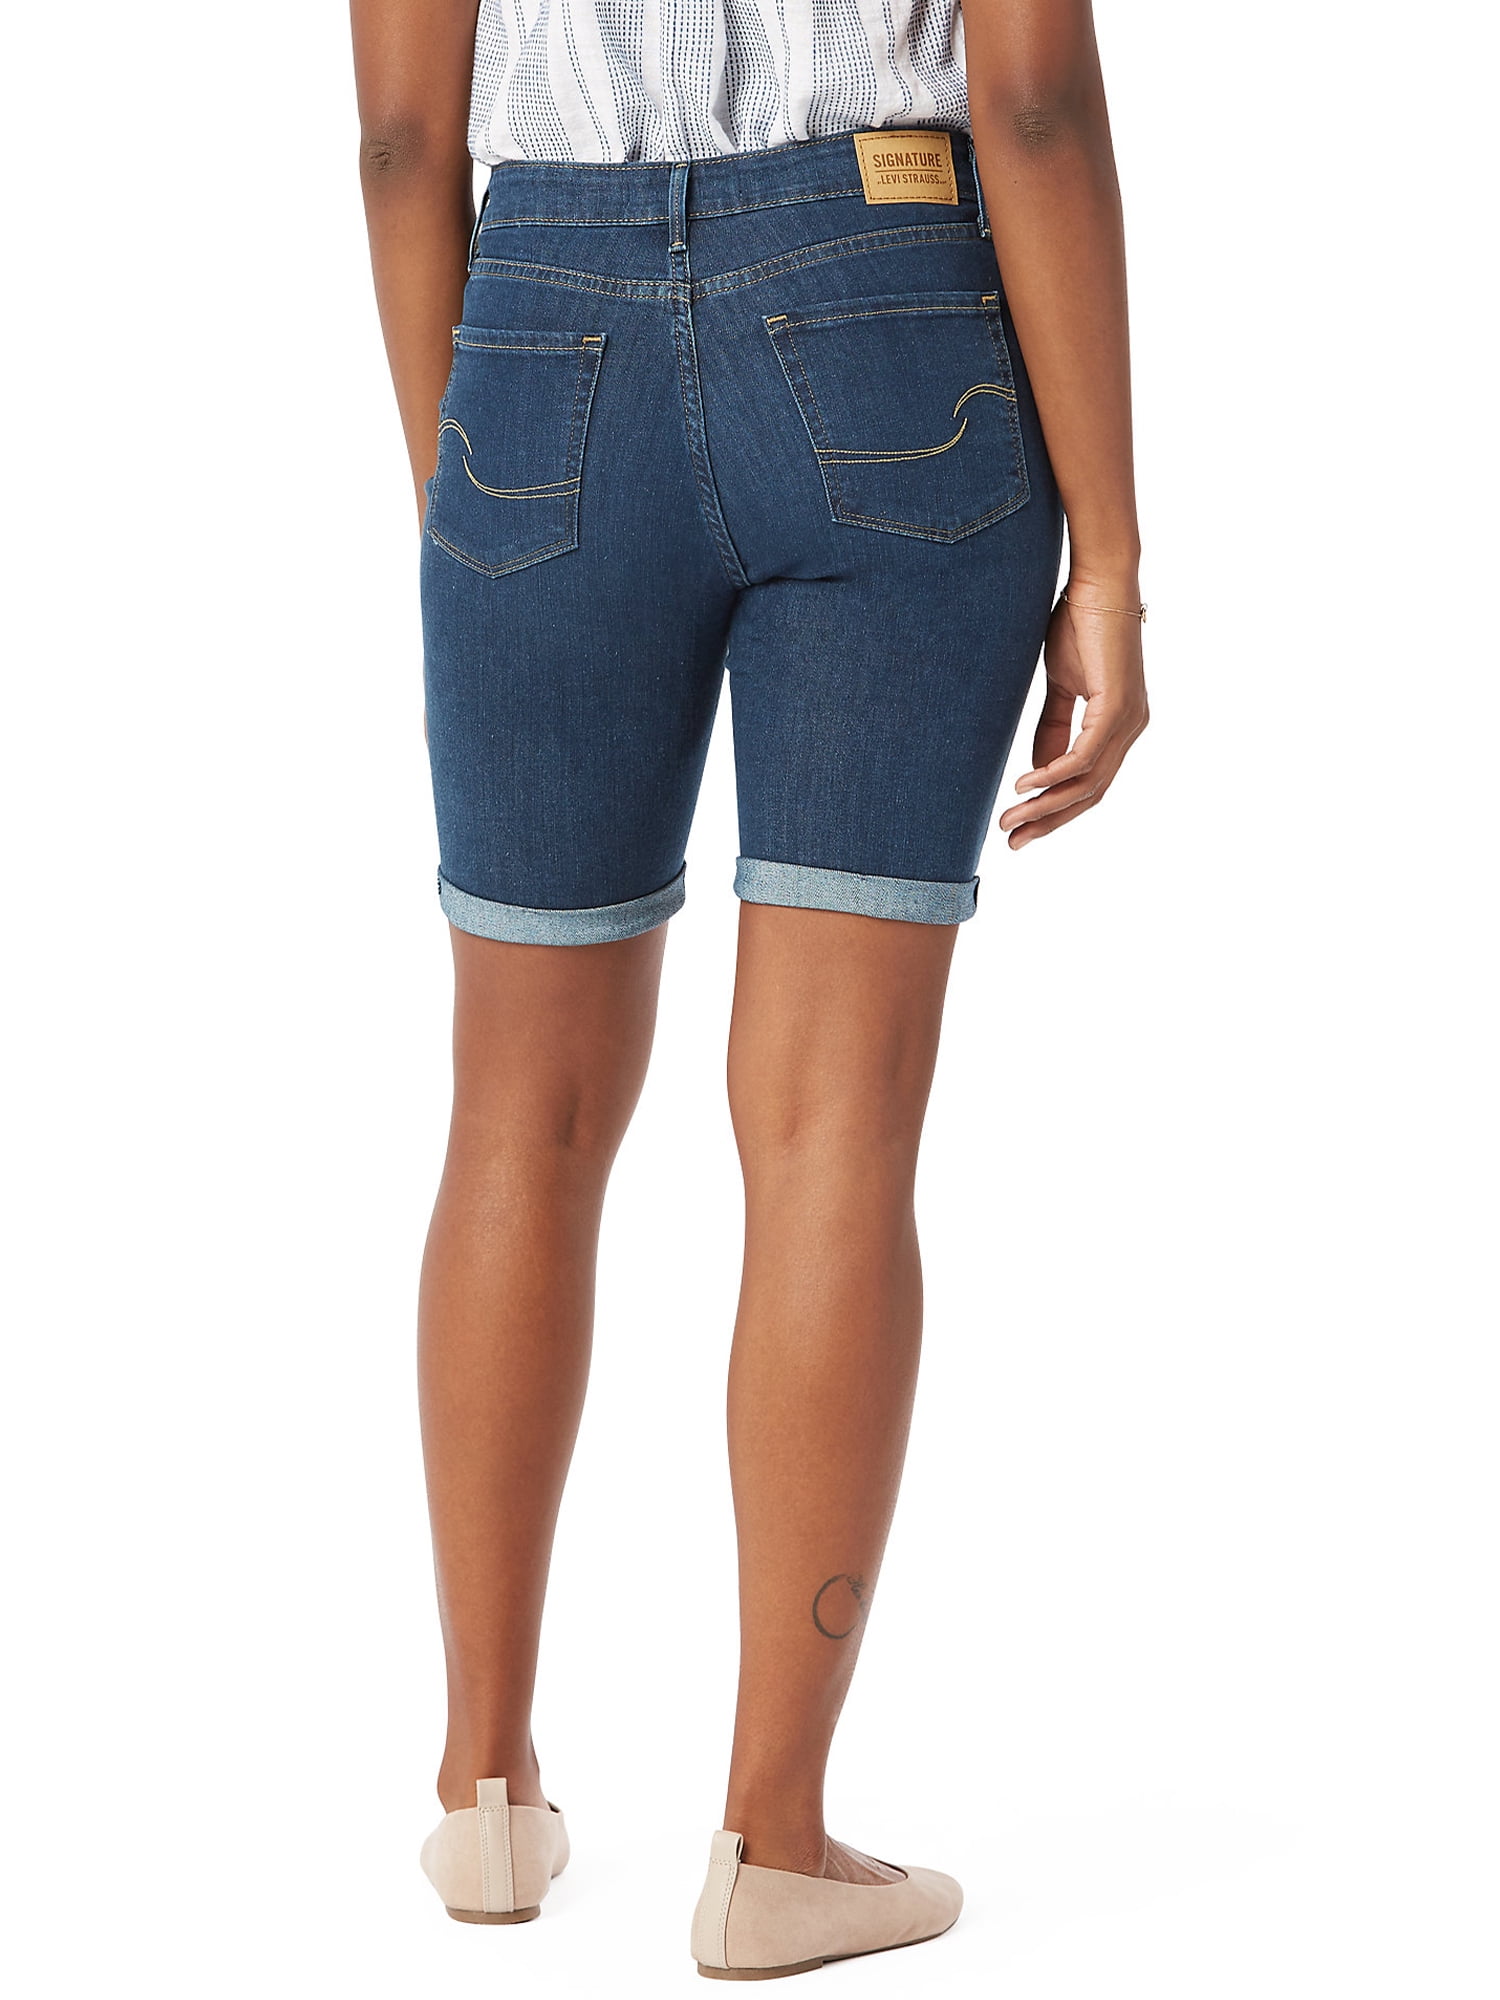 Signature by Levi Strauss & Co.™ Women's Mid Rise Bermuda Shorts -  